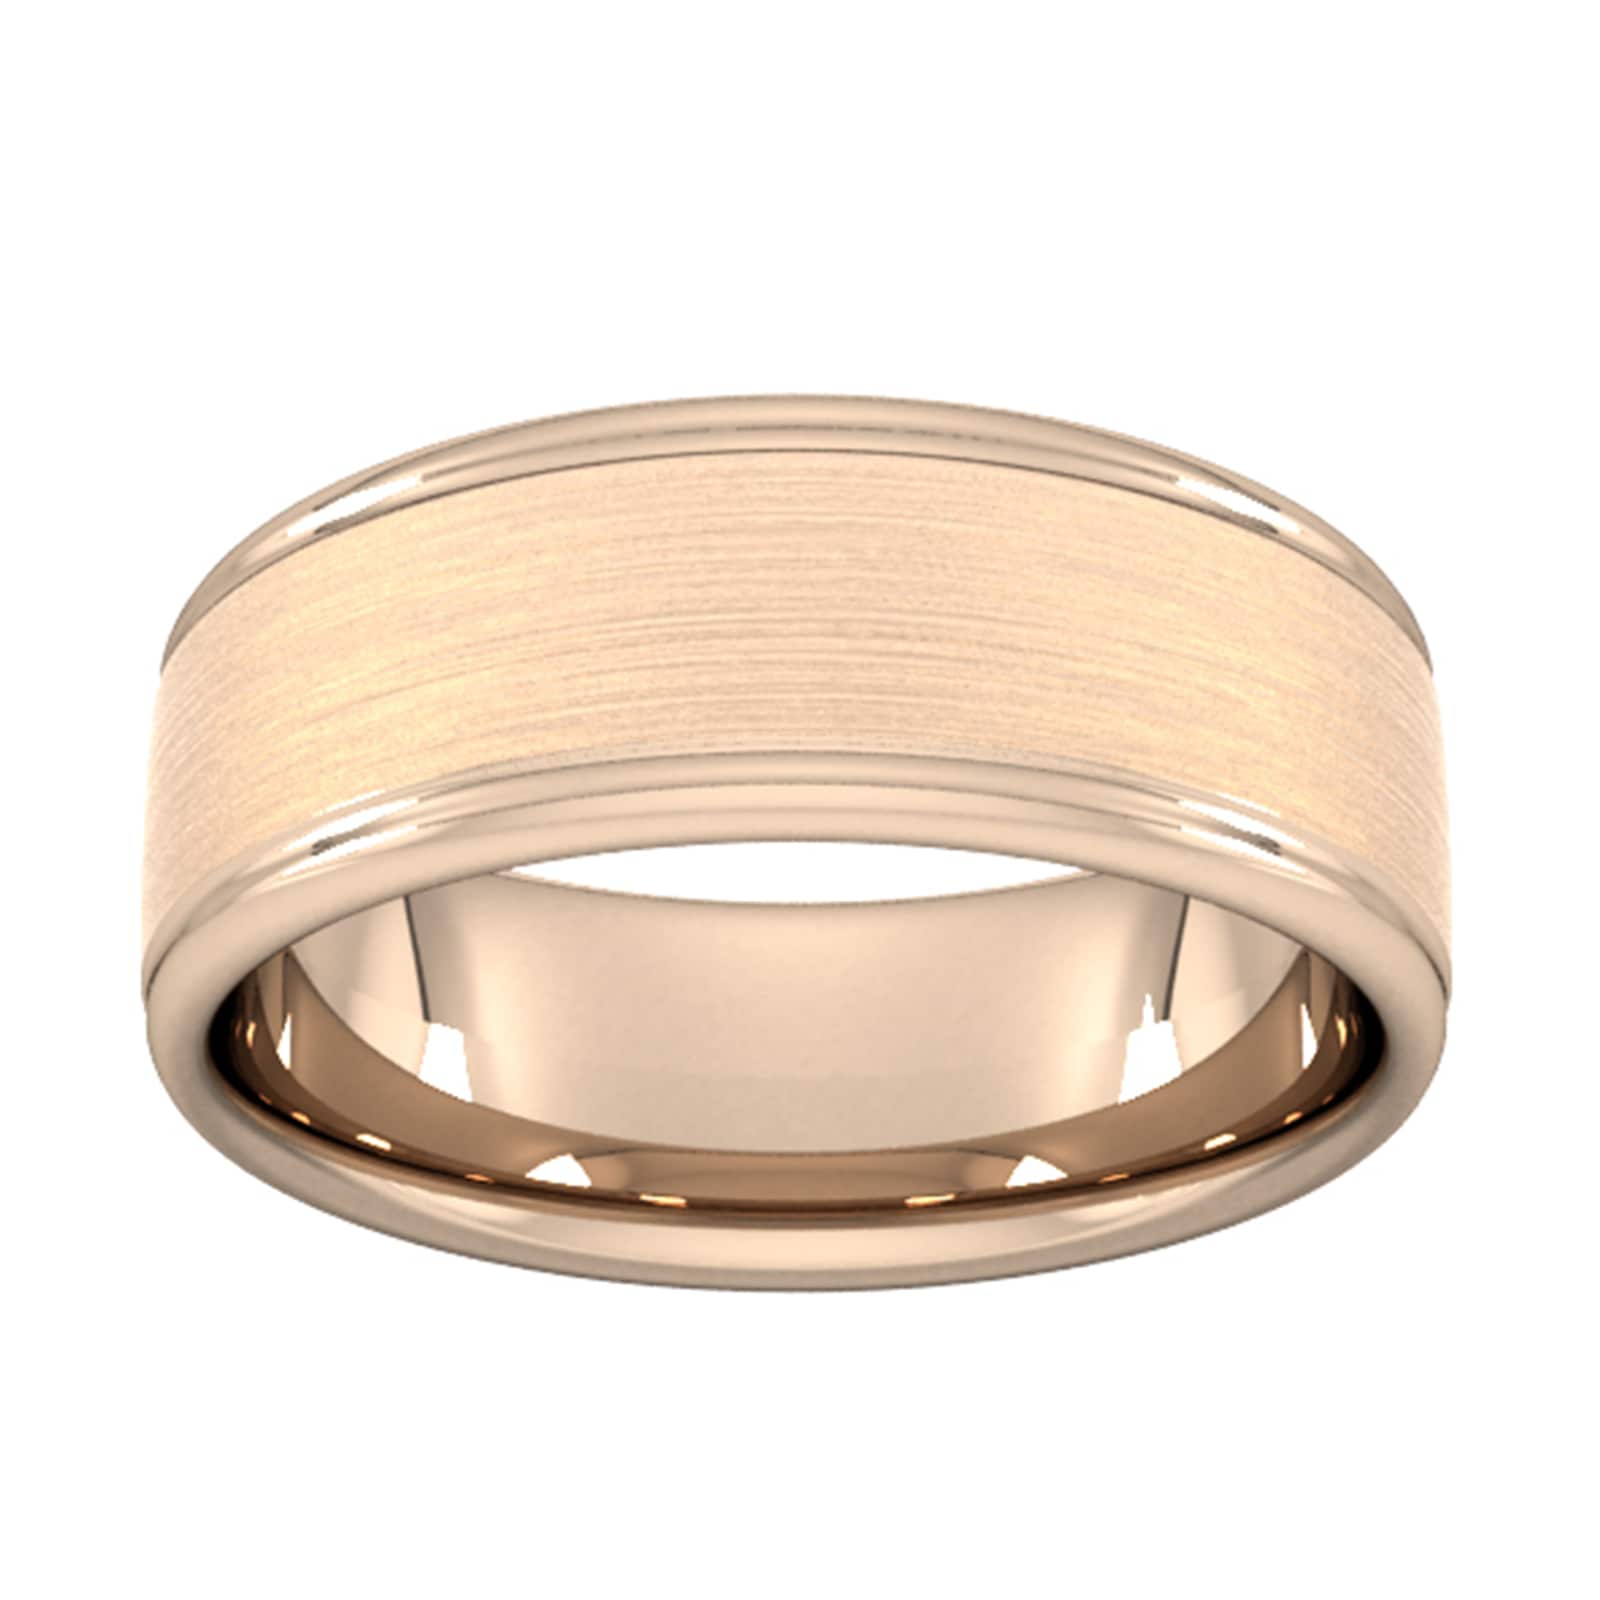 8mm Flat Court Heavy Matt Centre With Grooves Wedding Ring In 9 Carat Rose Gold - Ring Size L